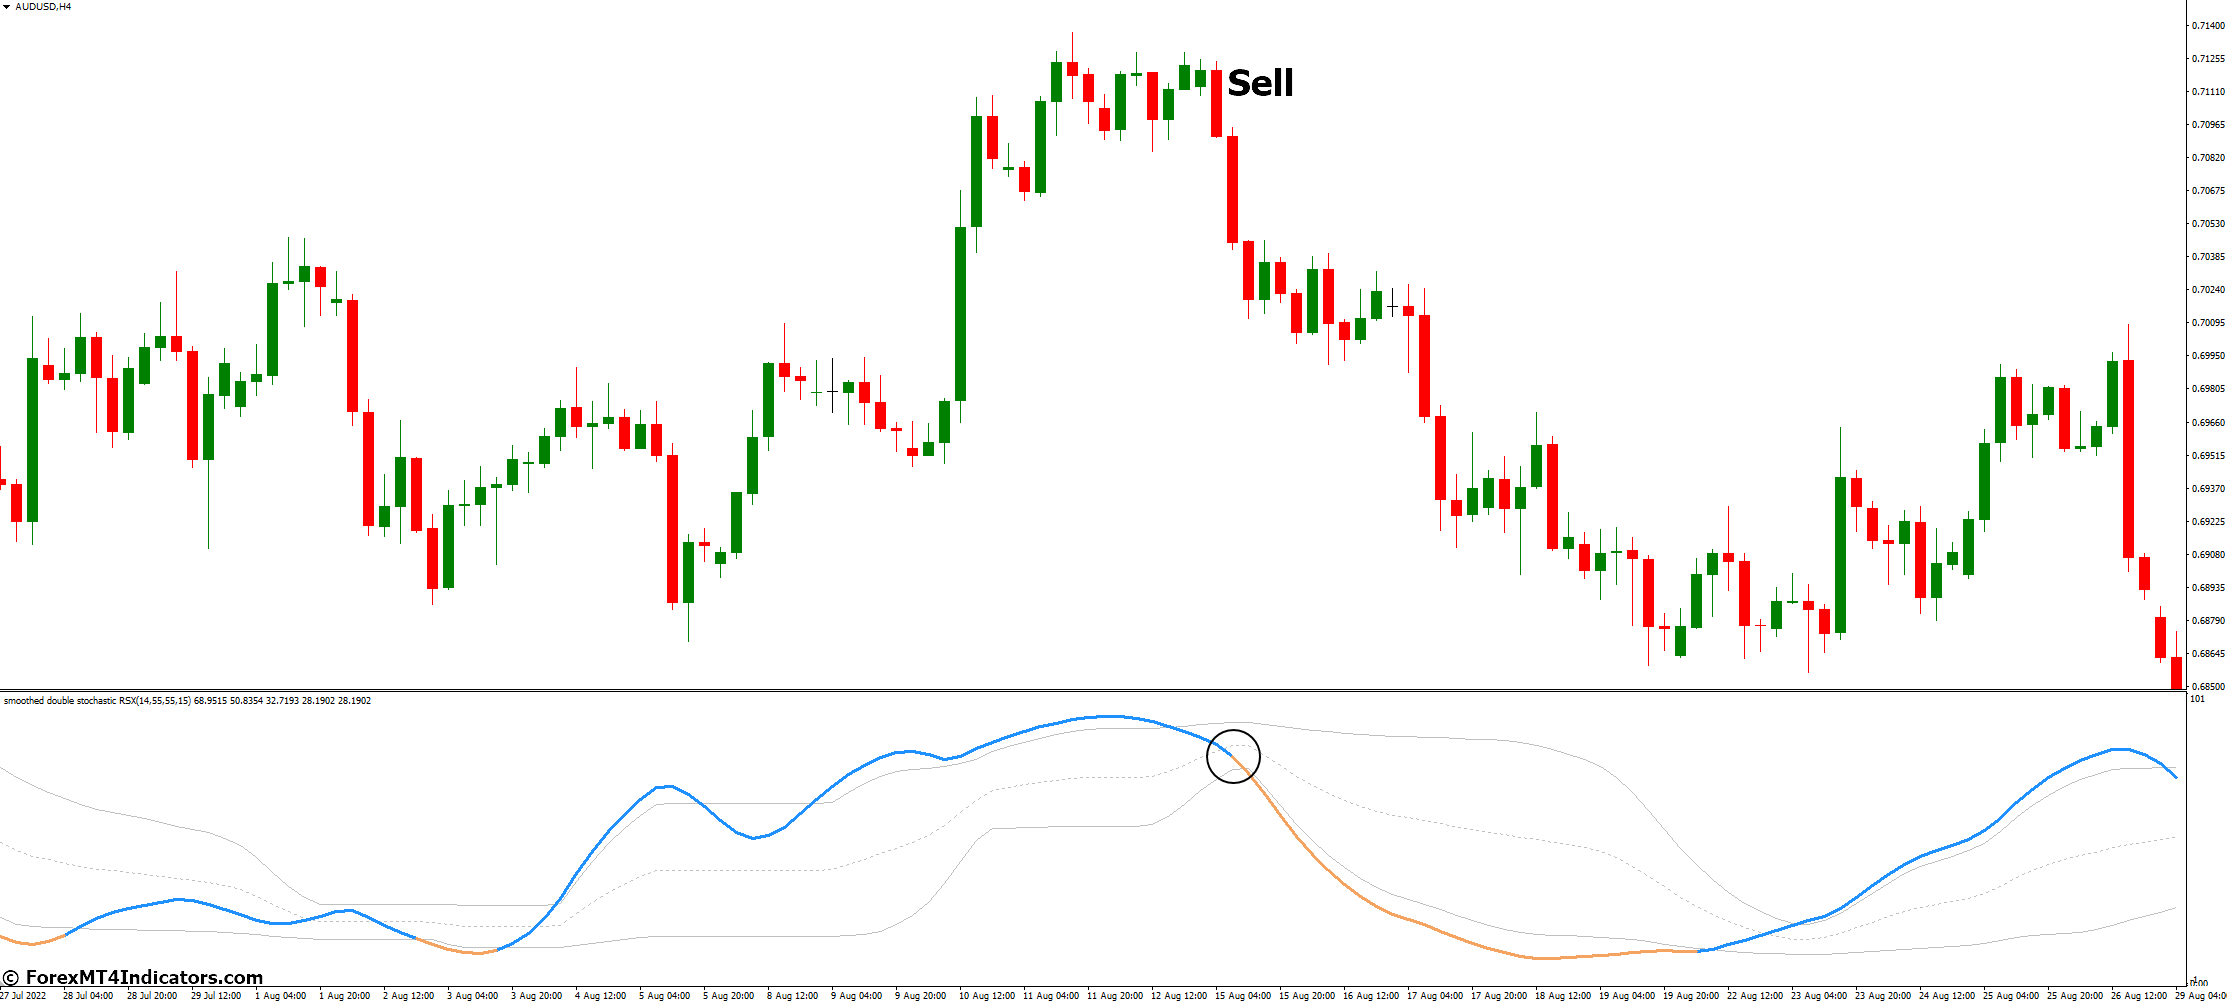 How to Trade with Double Stochastic RSI MT4 Indicator - Sell Entry